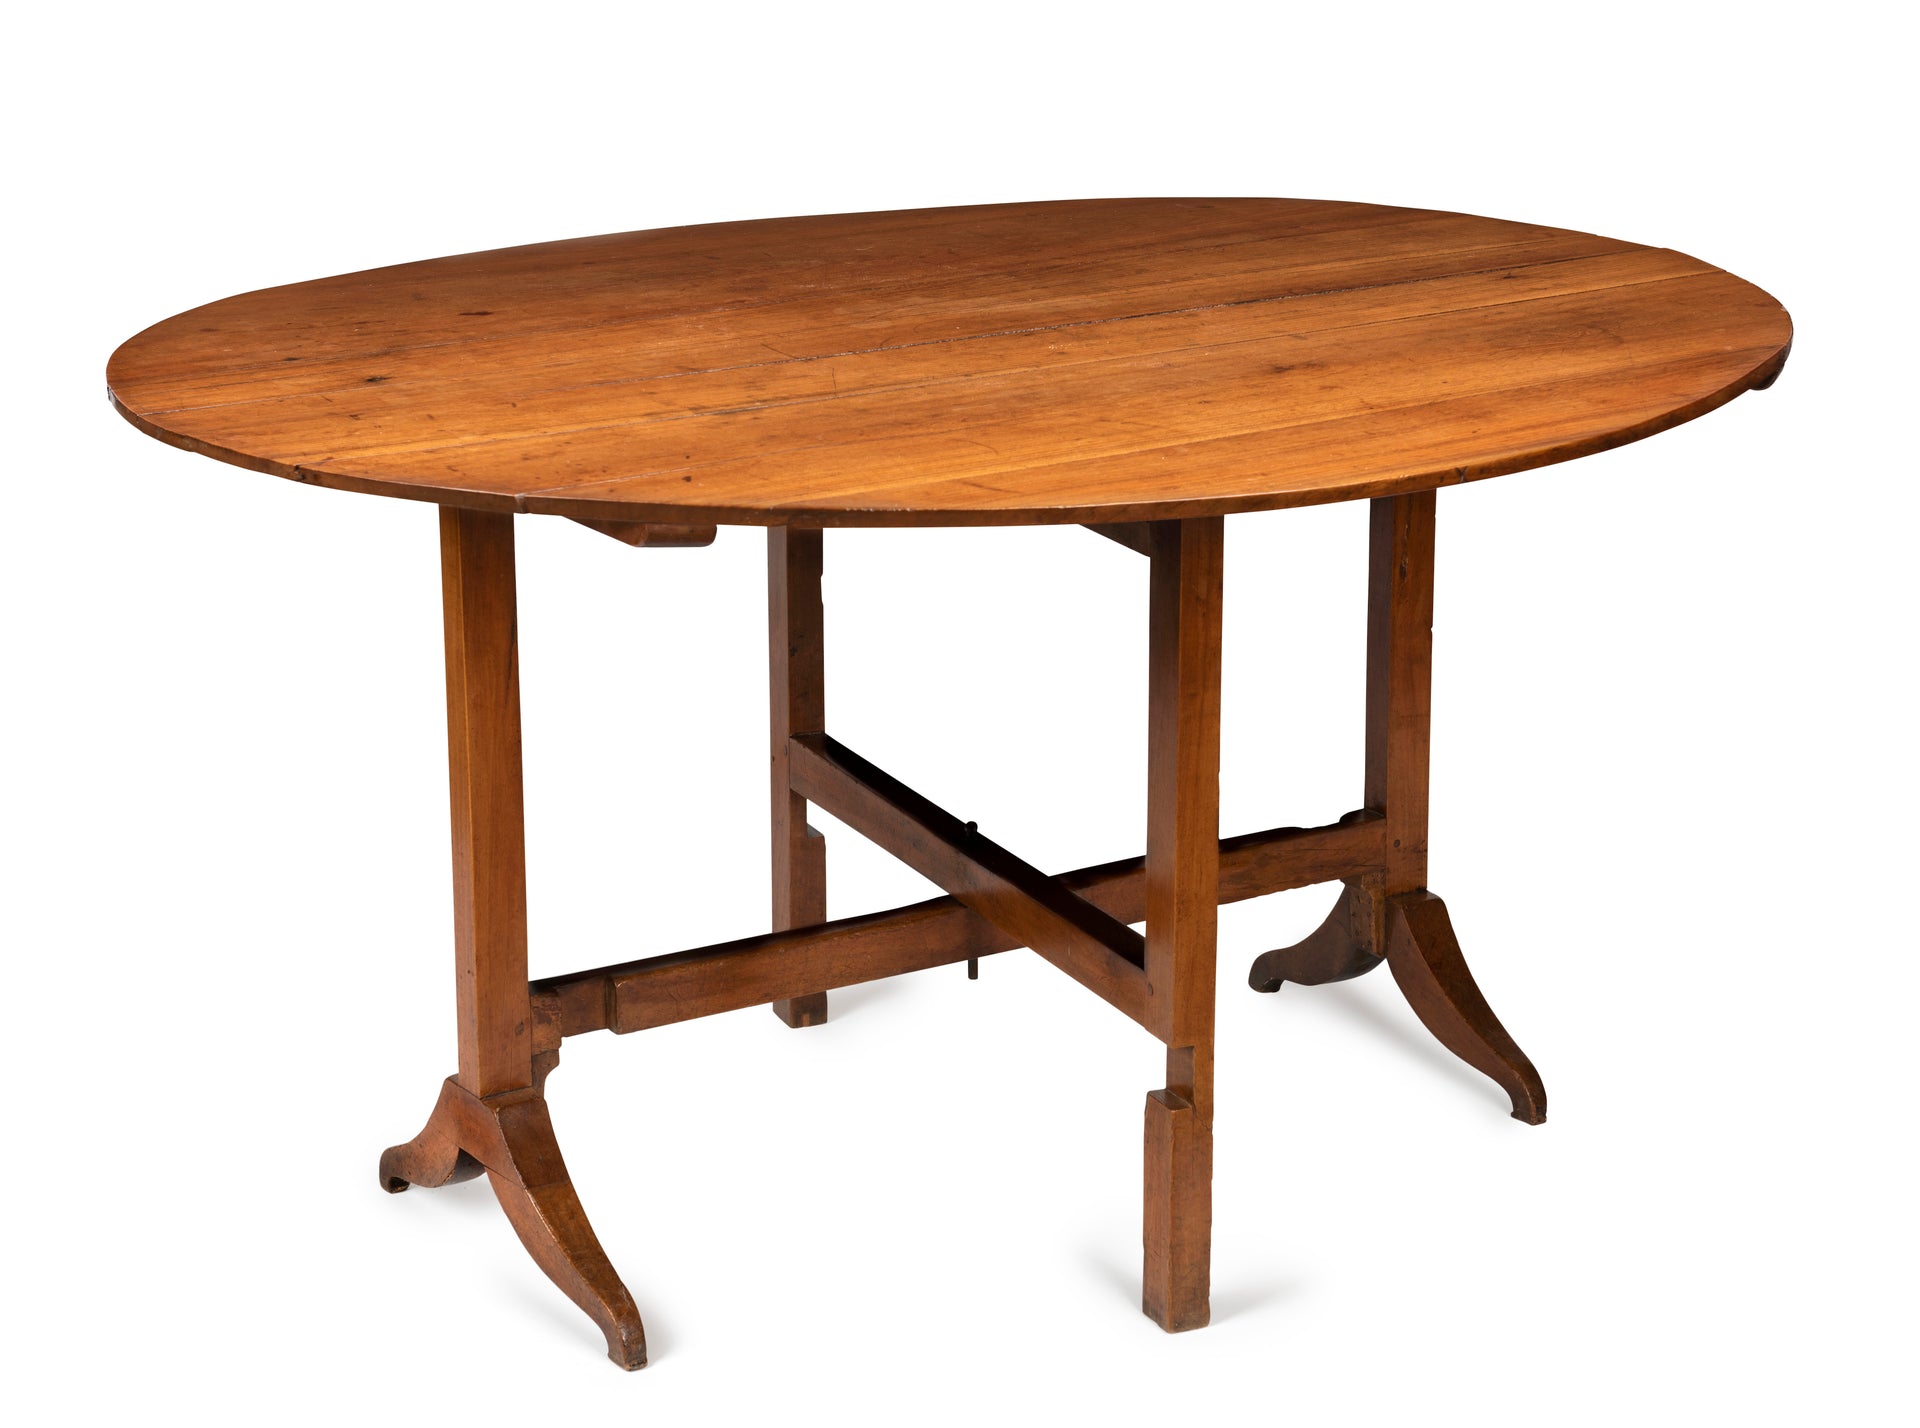 SOLD Provincial oval fruitwood Vignerons table, French late 18th, early 19th Century